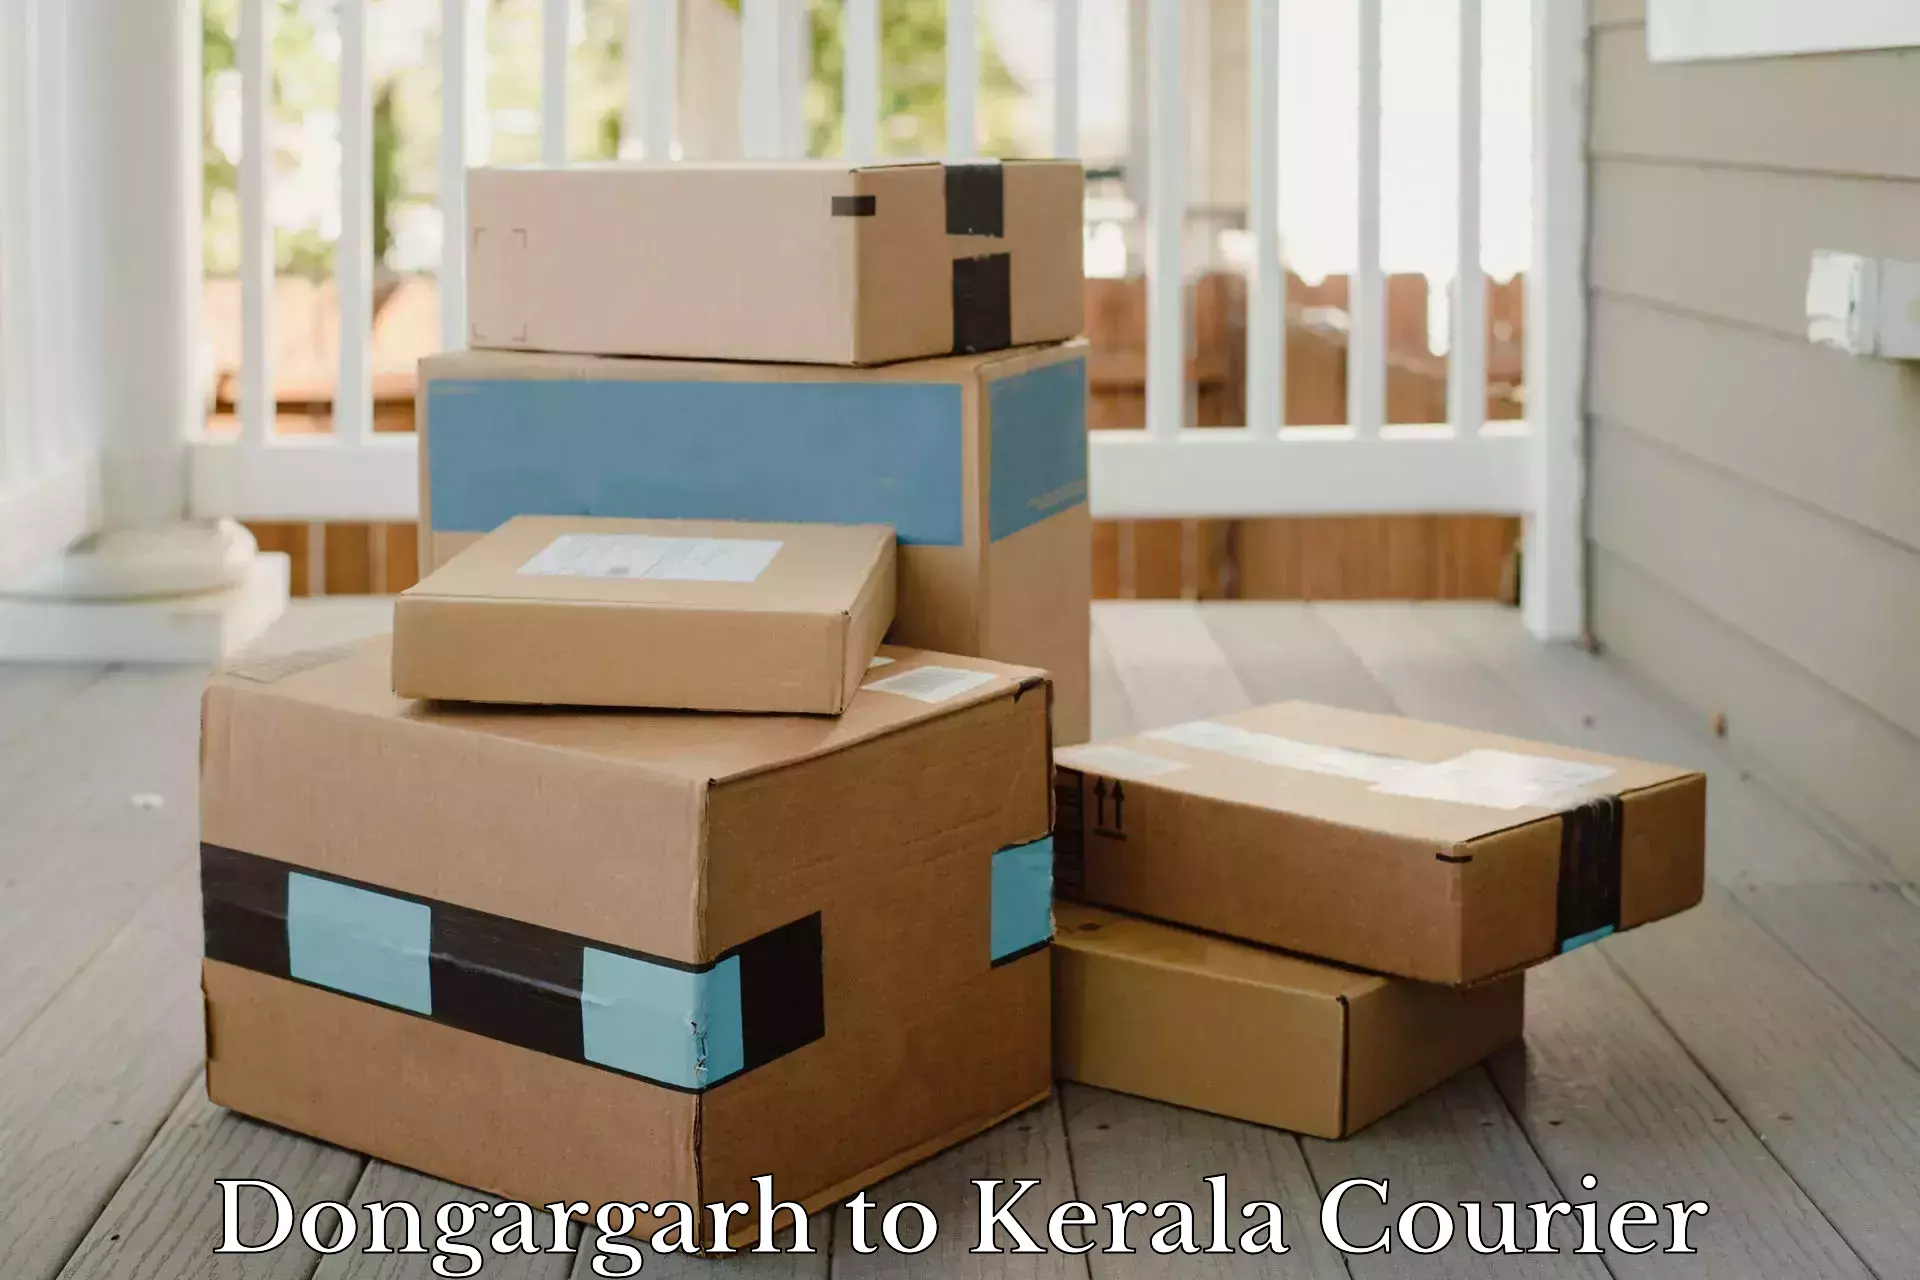 Parcel handling and care Dongargarh to Kuchi